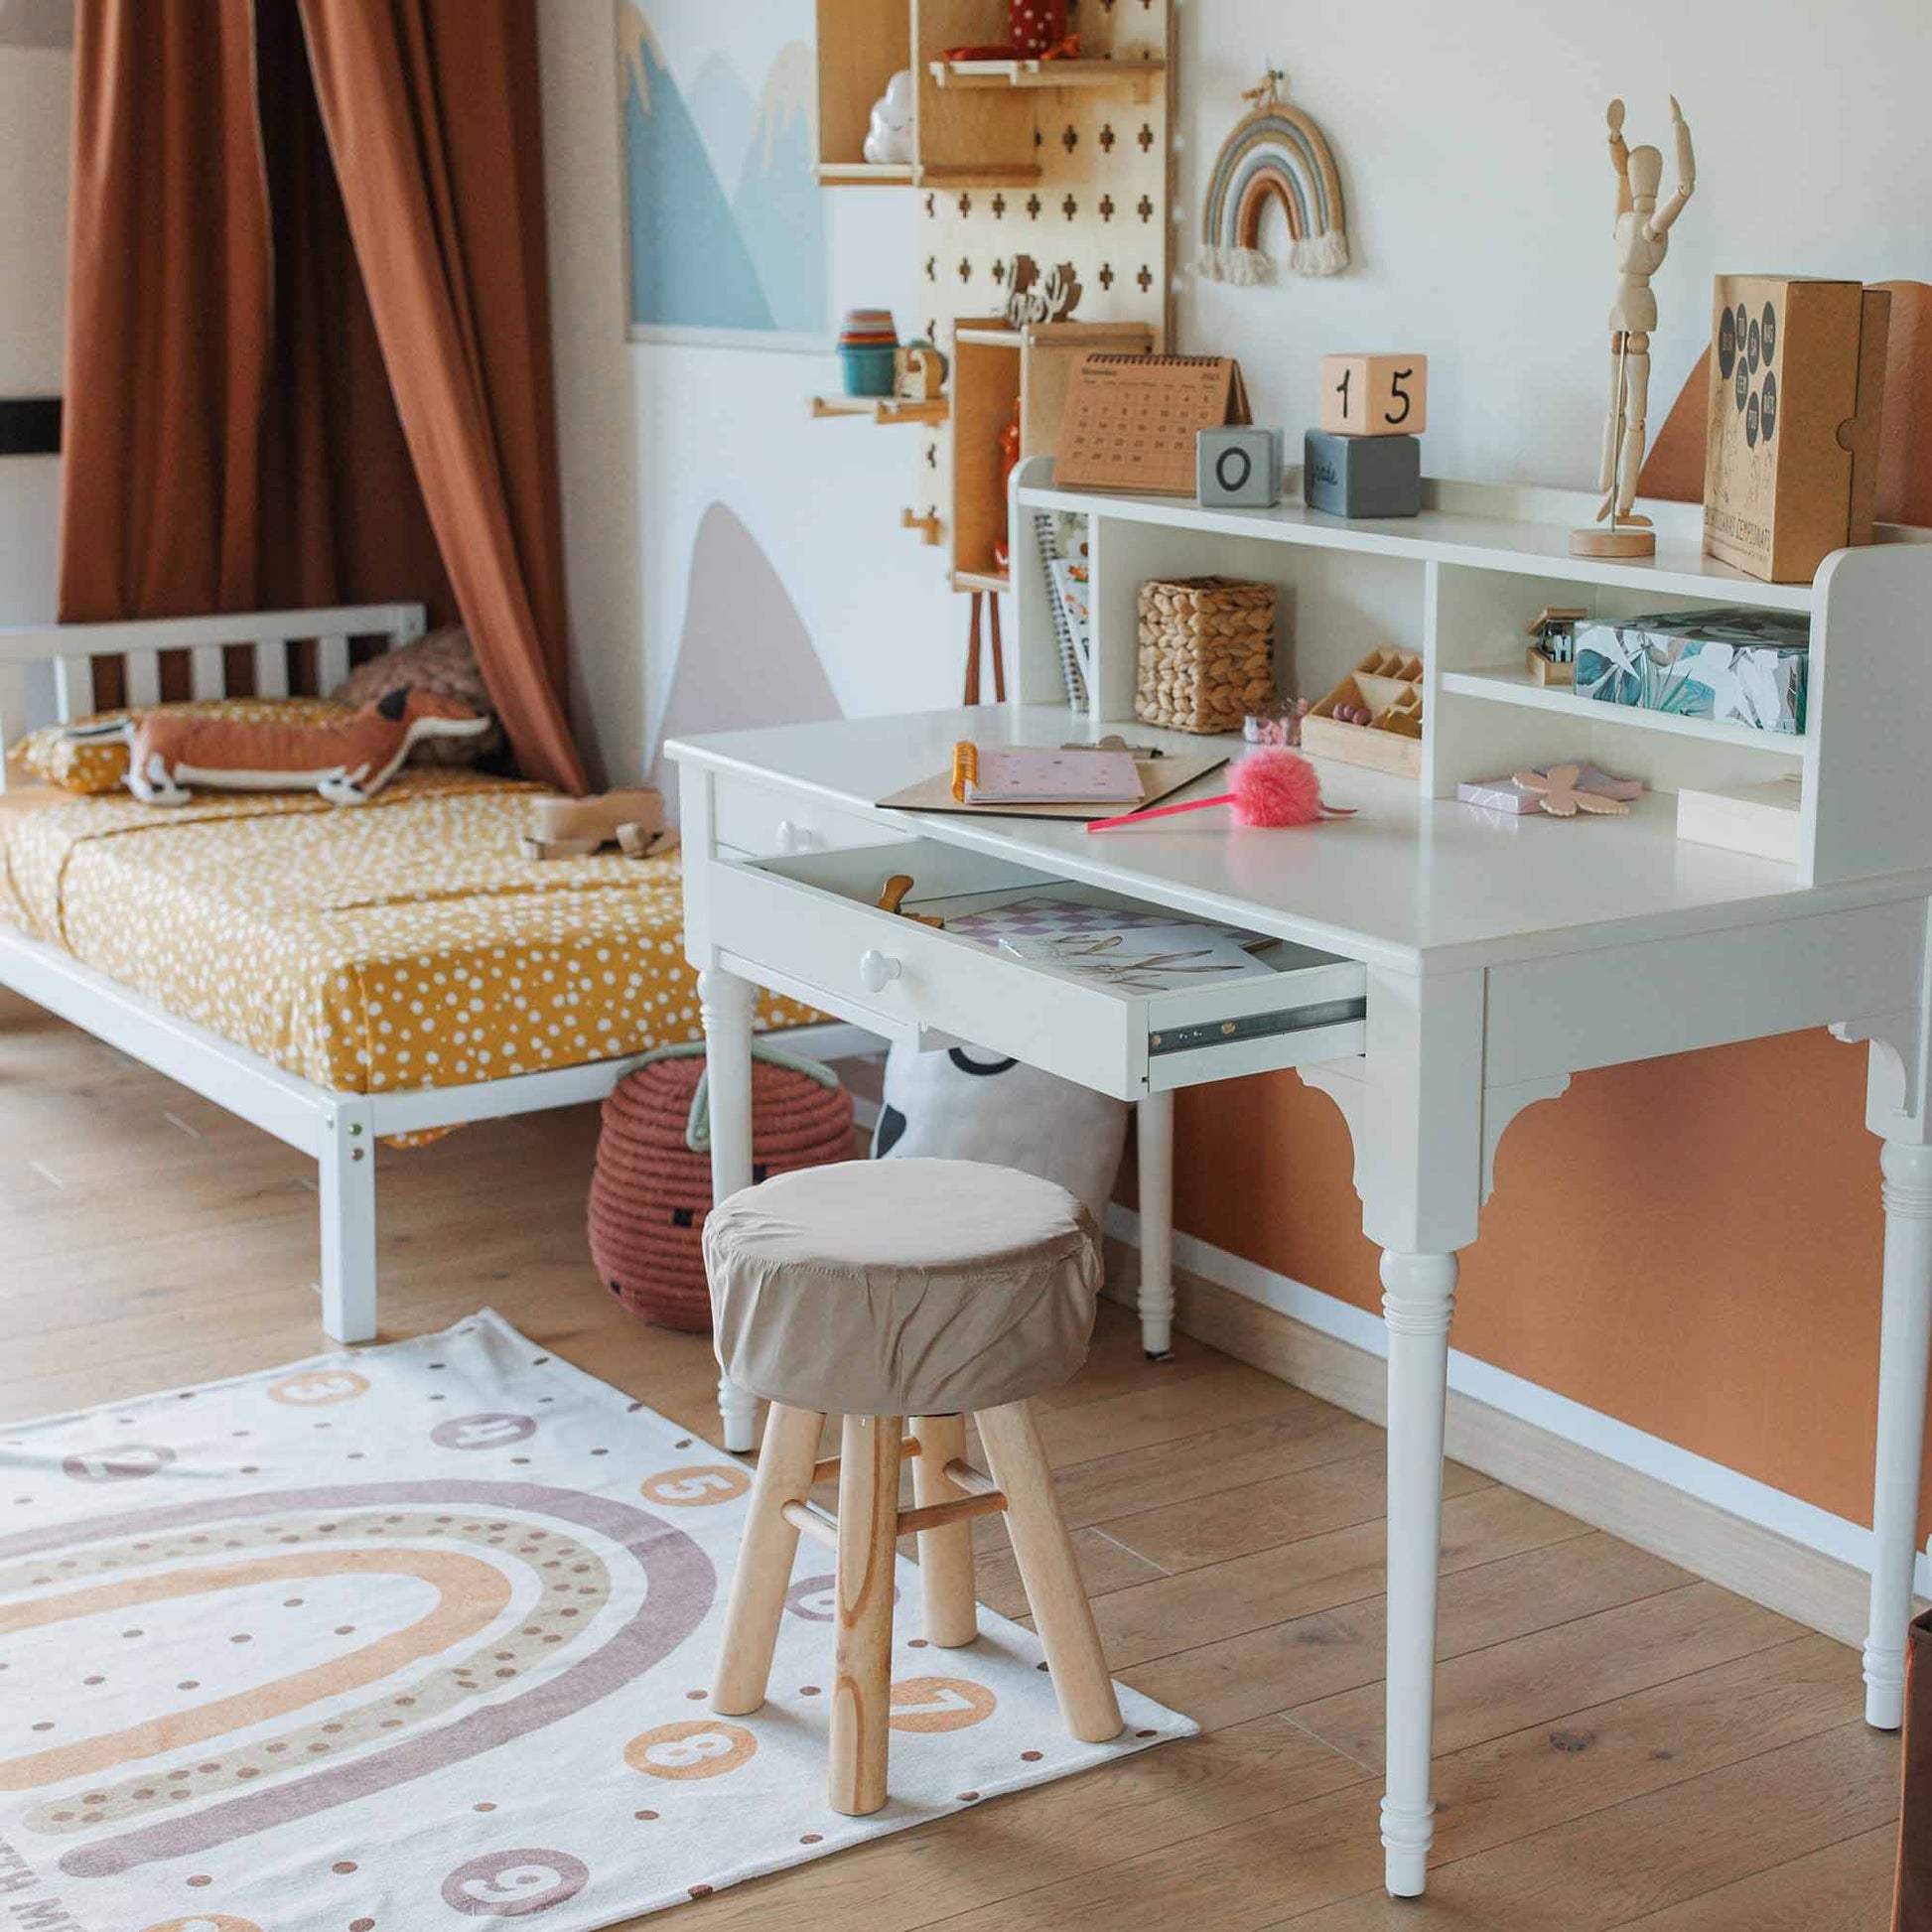 A children's study area features a versatile table with a hutch and a pedestal desk, accompanied by a stool and various items. Adjacent to the desk is a bed adorned with a polka-dotted yellow blanket. The room boasts wooden flooring, a decorative rug, and ample cable management for tidy organization.